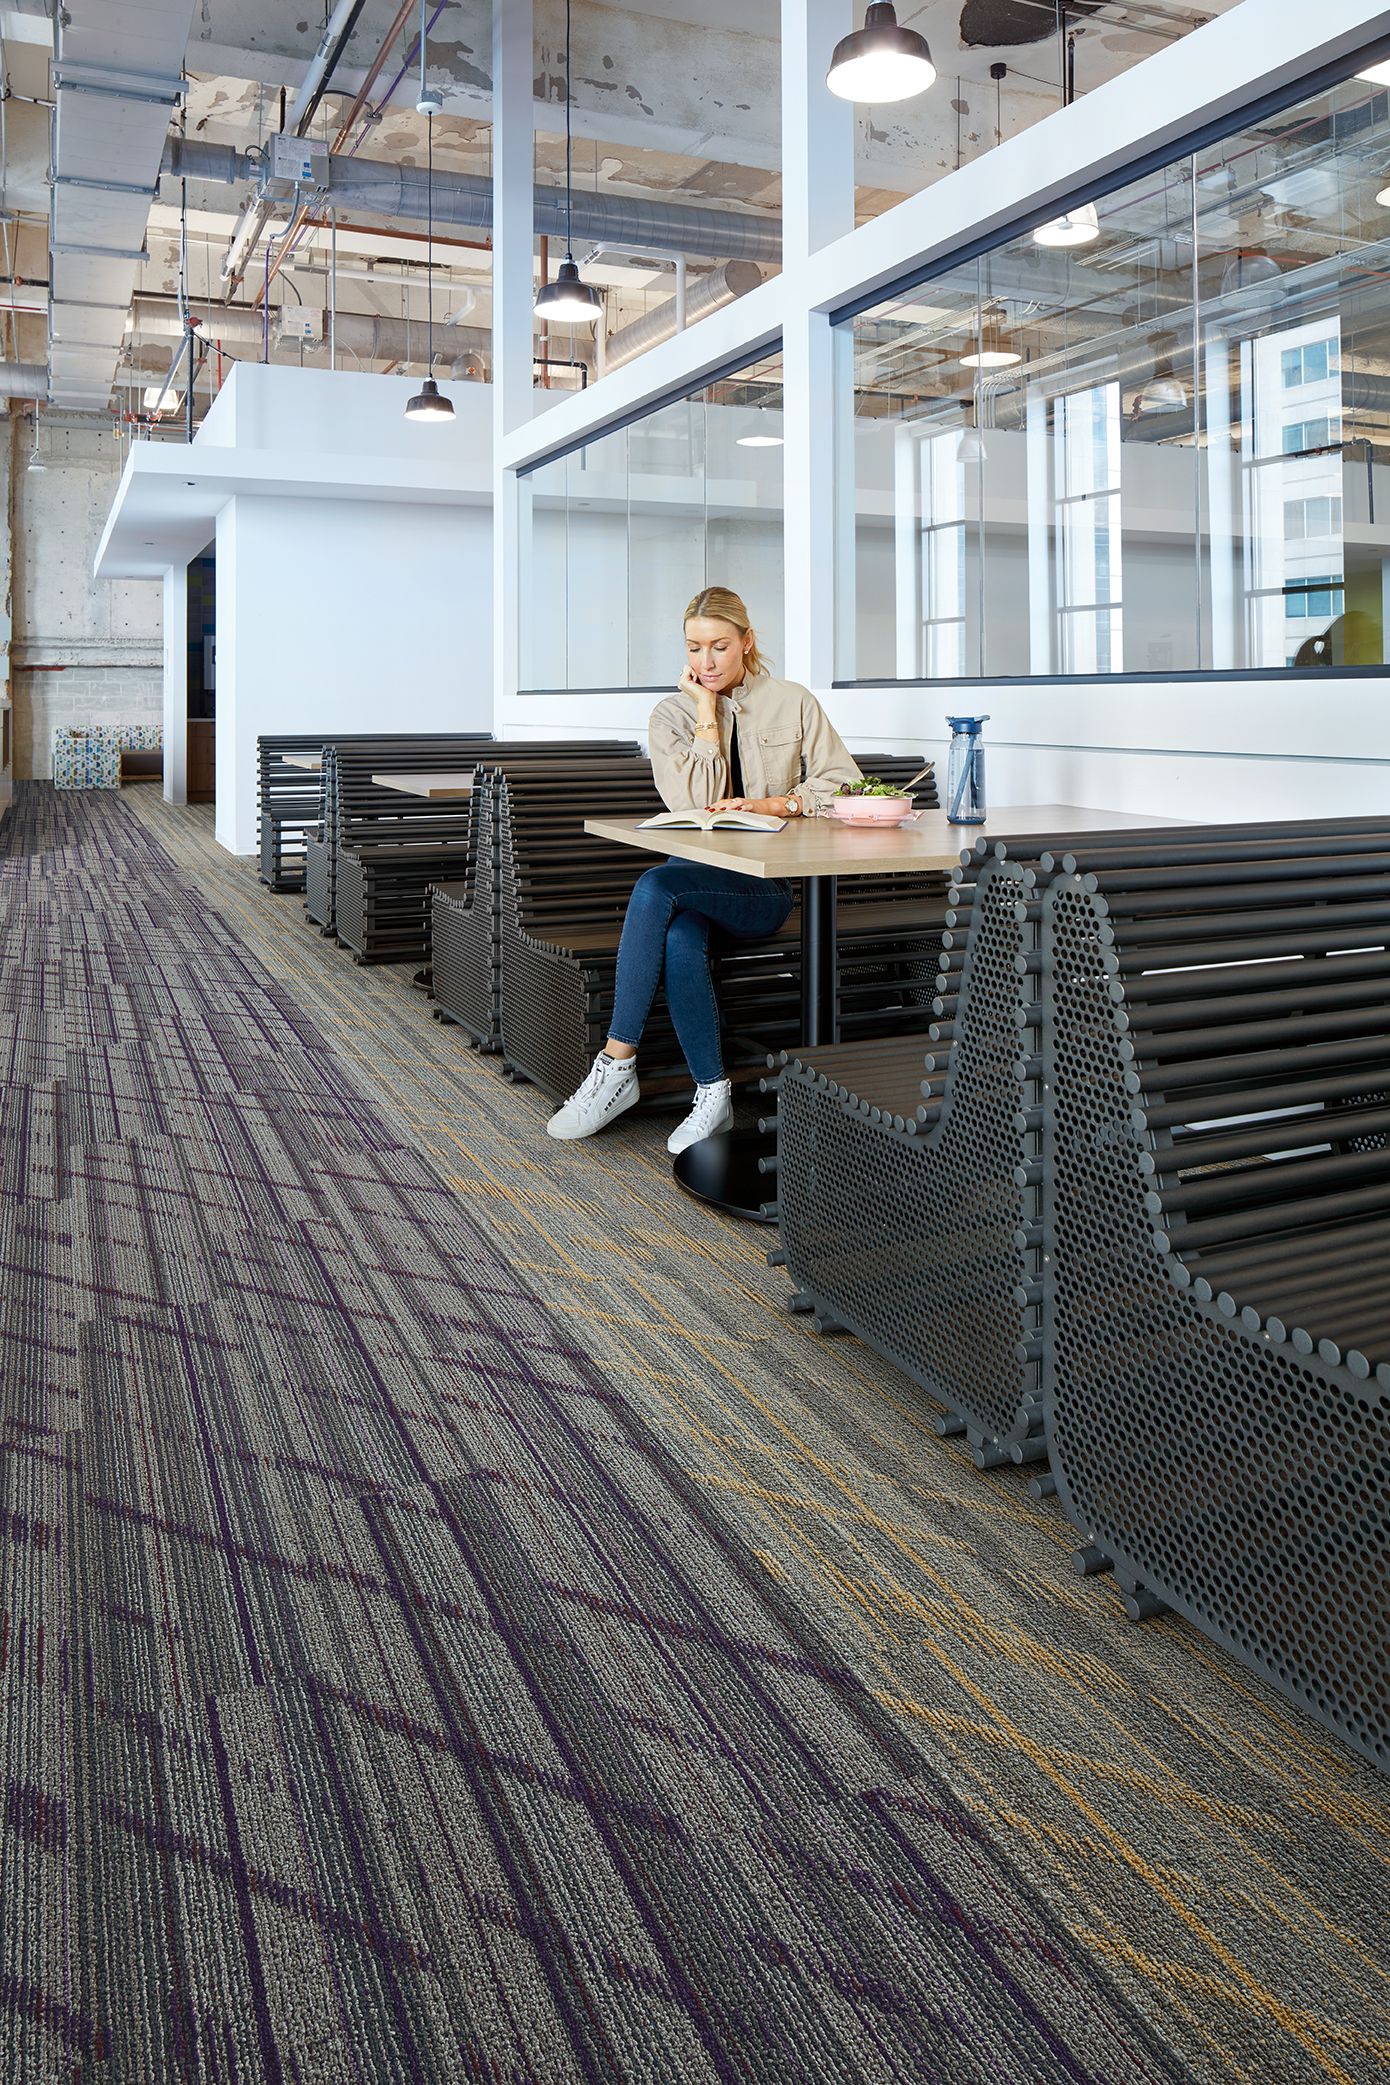 Interface Luminescent plank carpet tile in cafe area with woman seated at table image number 6